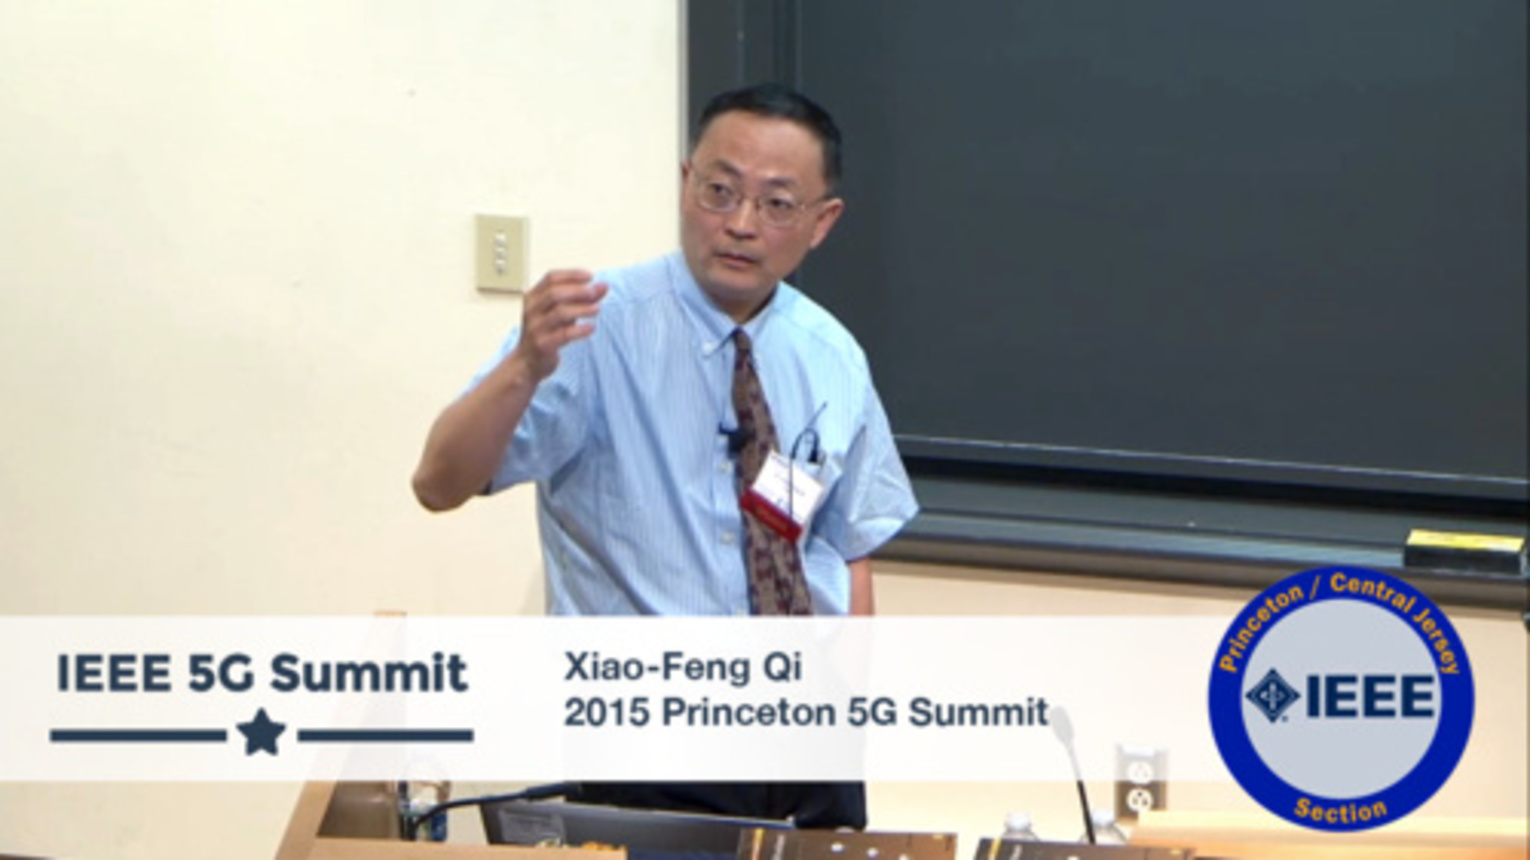 Princeton 5G Summit - Xiao-Feng Qi Keynote - We Want You - The Importance of Users and User-Centric Networks